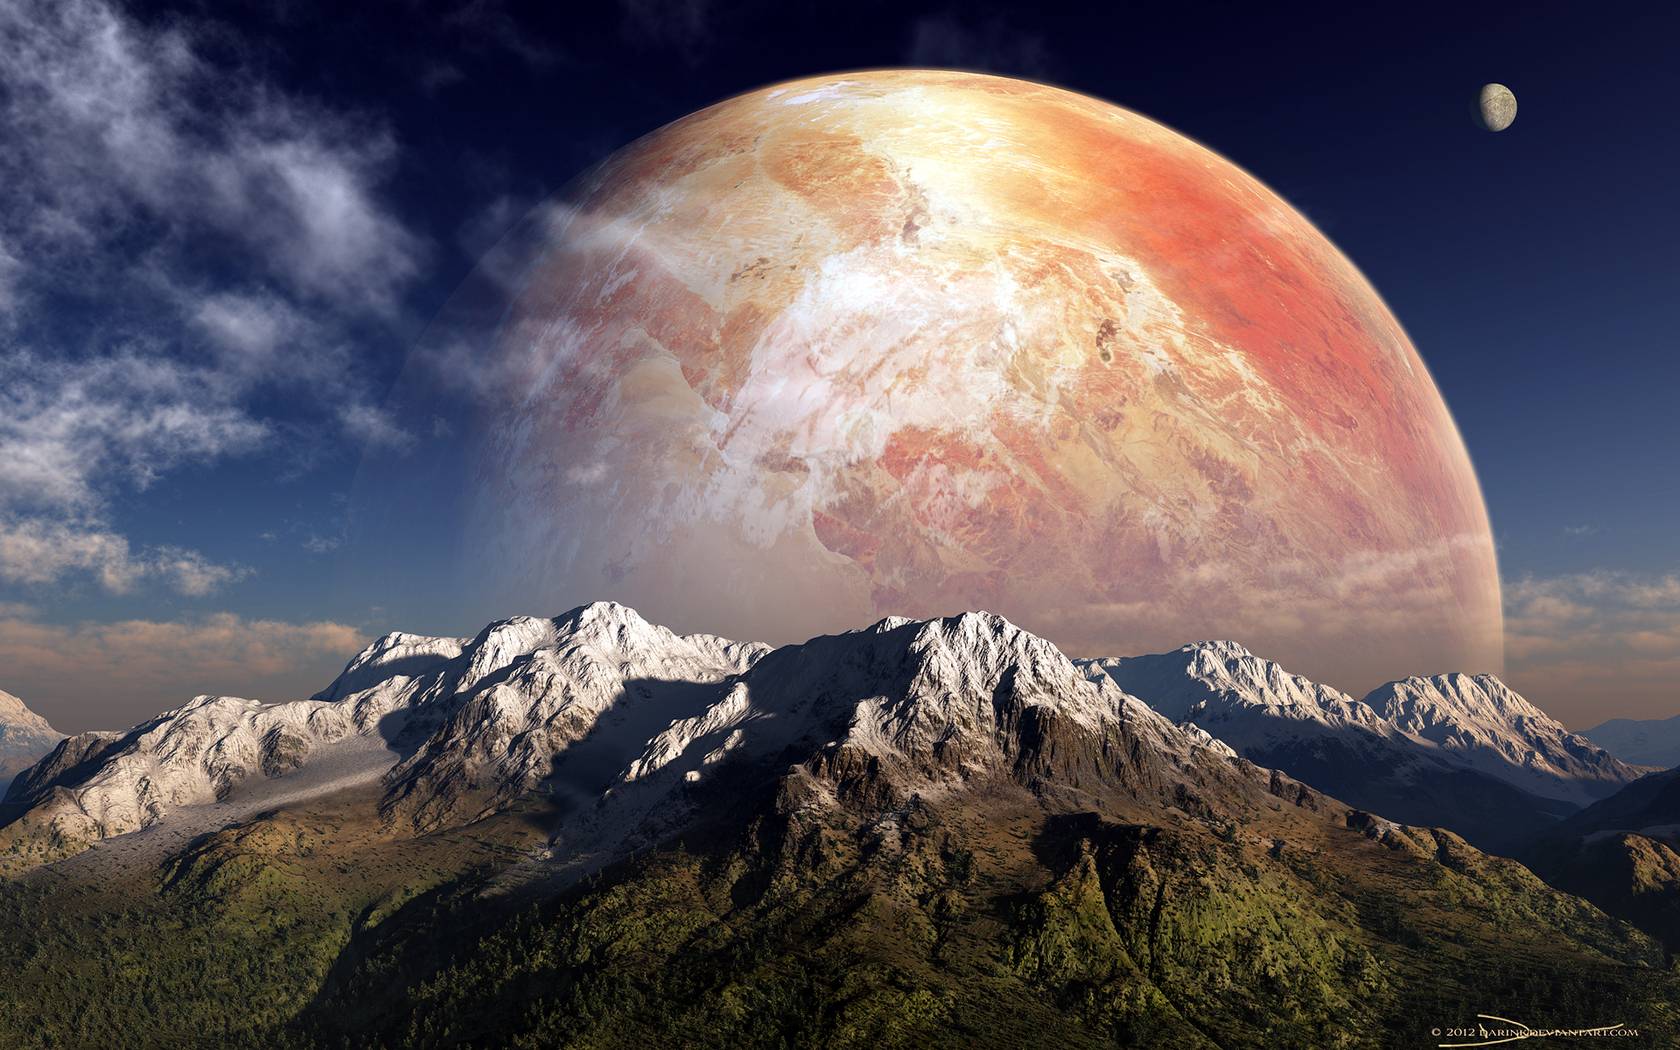 Download wallpaper alien planet, Mountains, sky, clouds free